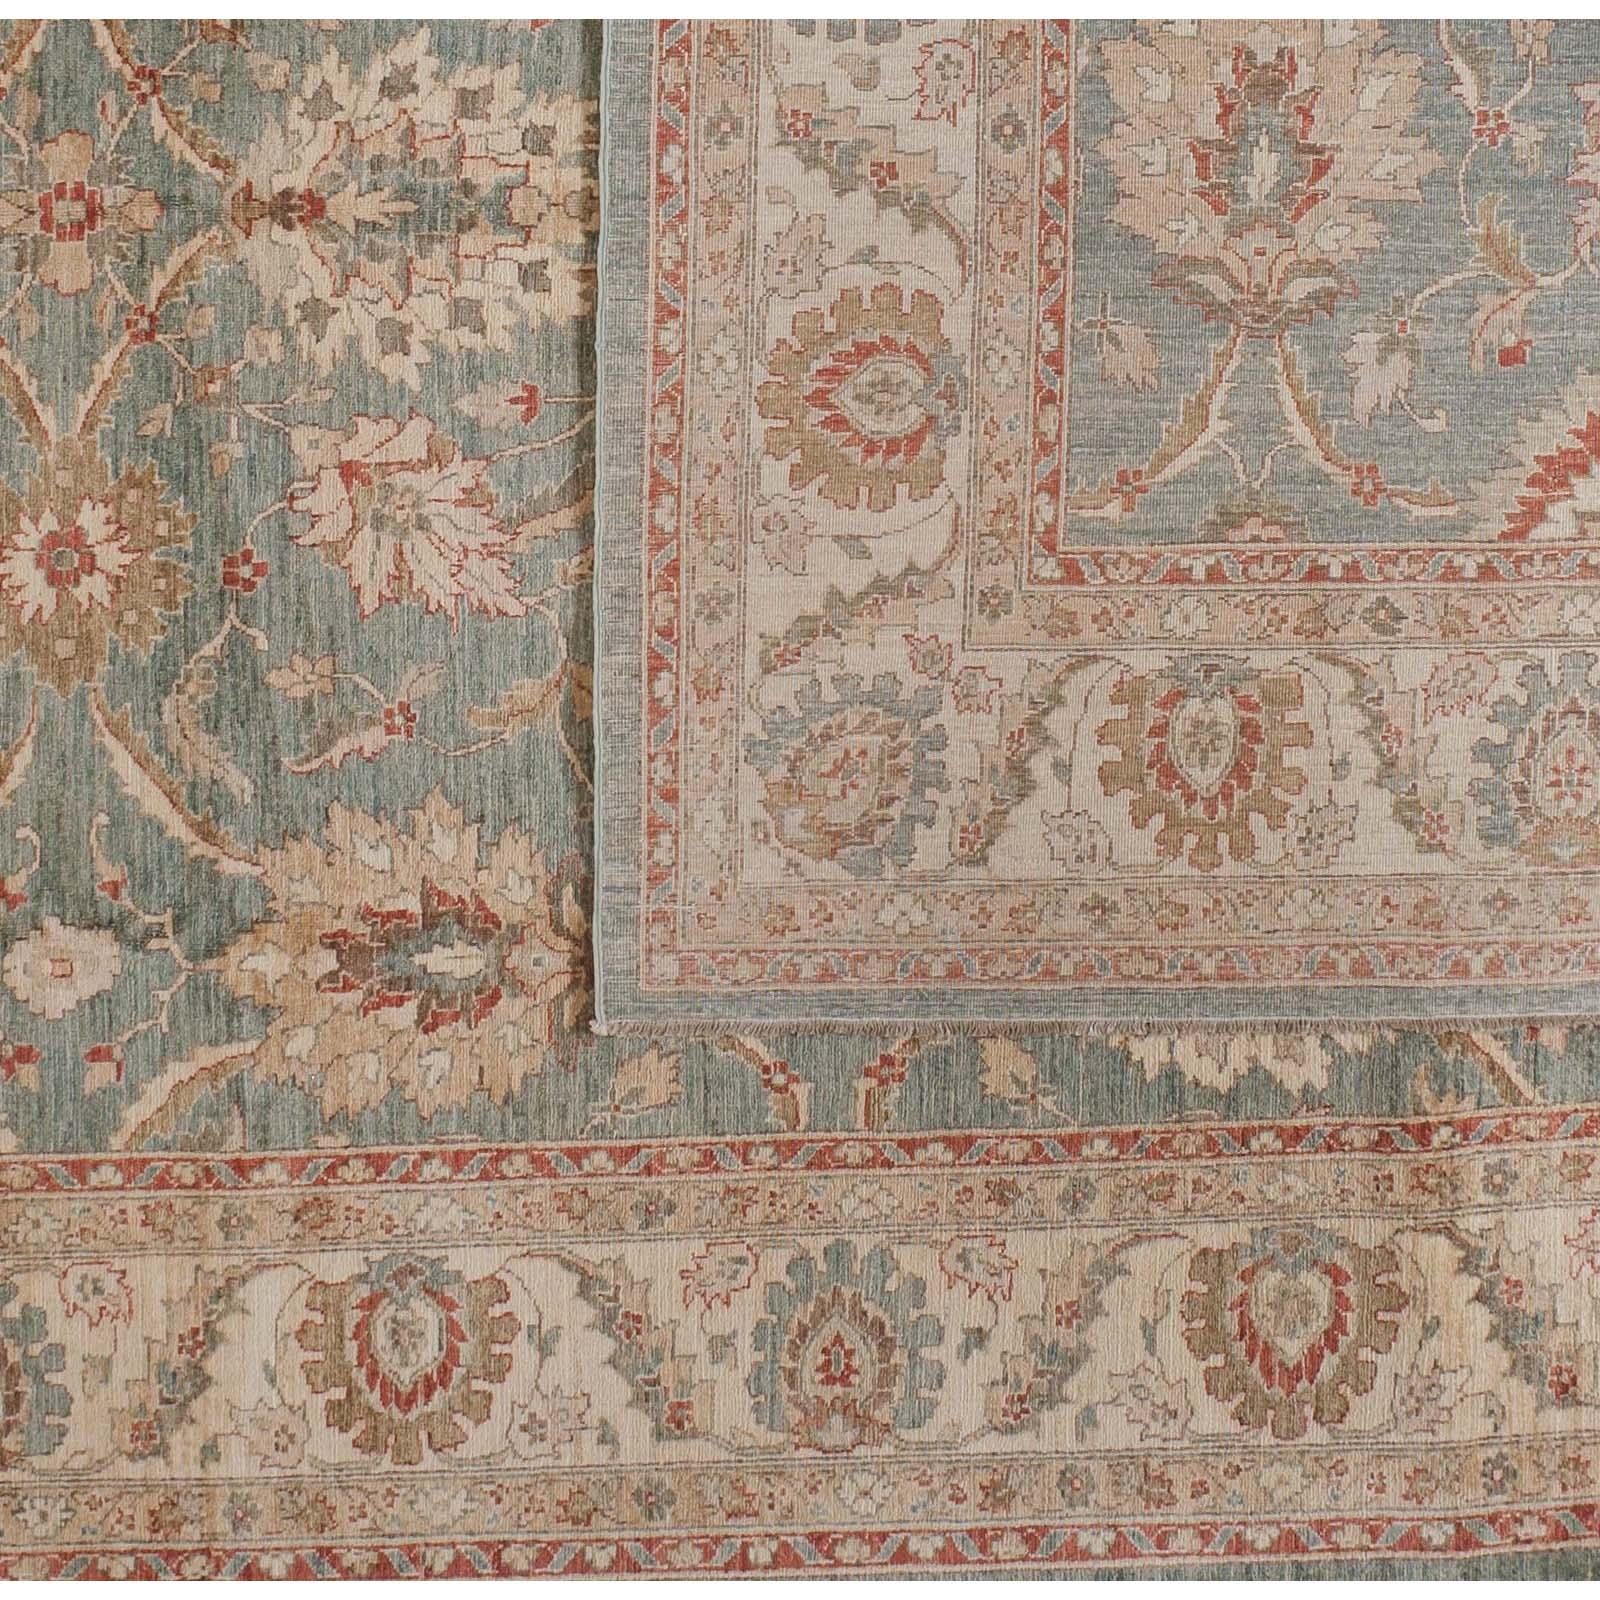 A palette of gold, teal, rust and brown comes together elegantly in this traditional Pakistani wool area rug with floral motif. Subtle gradations within each element add vibrancy and versatility for its use with a range of colors and finishes. Hand